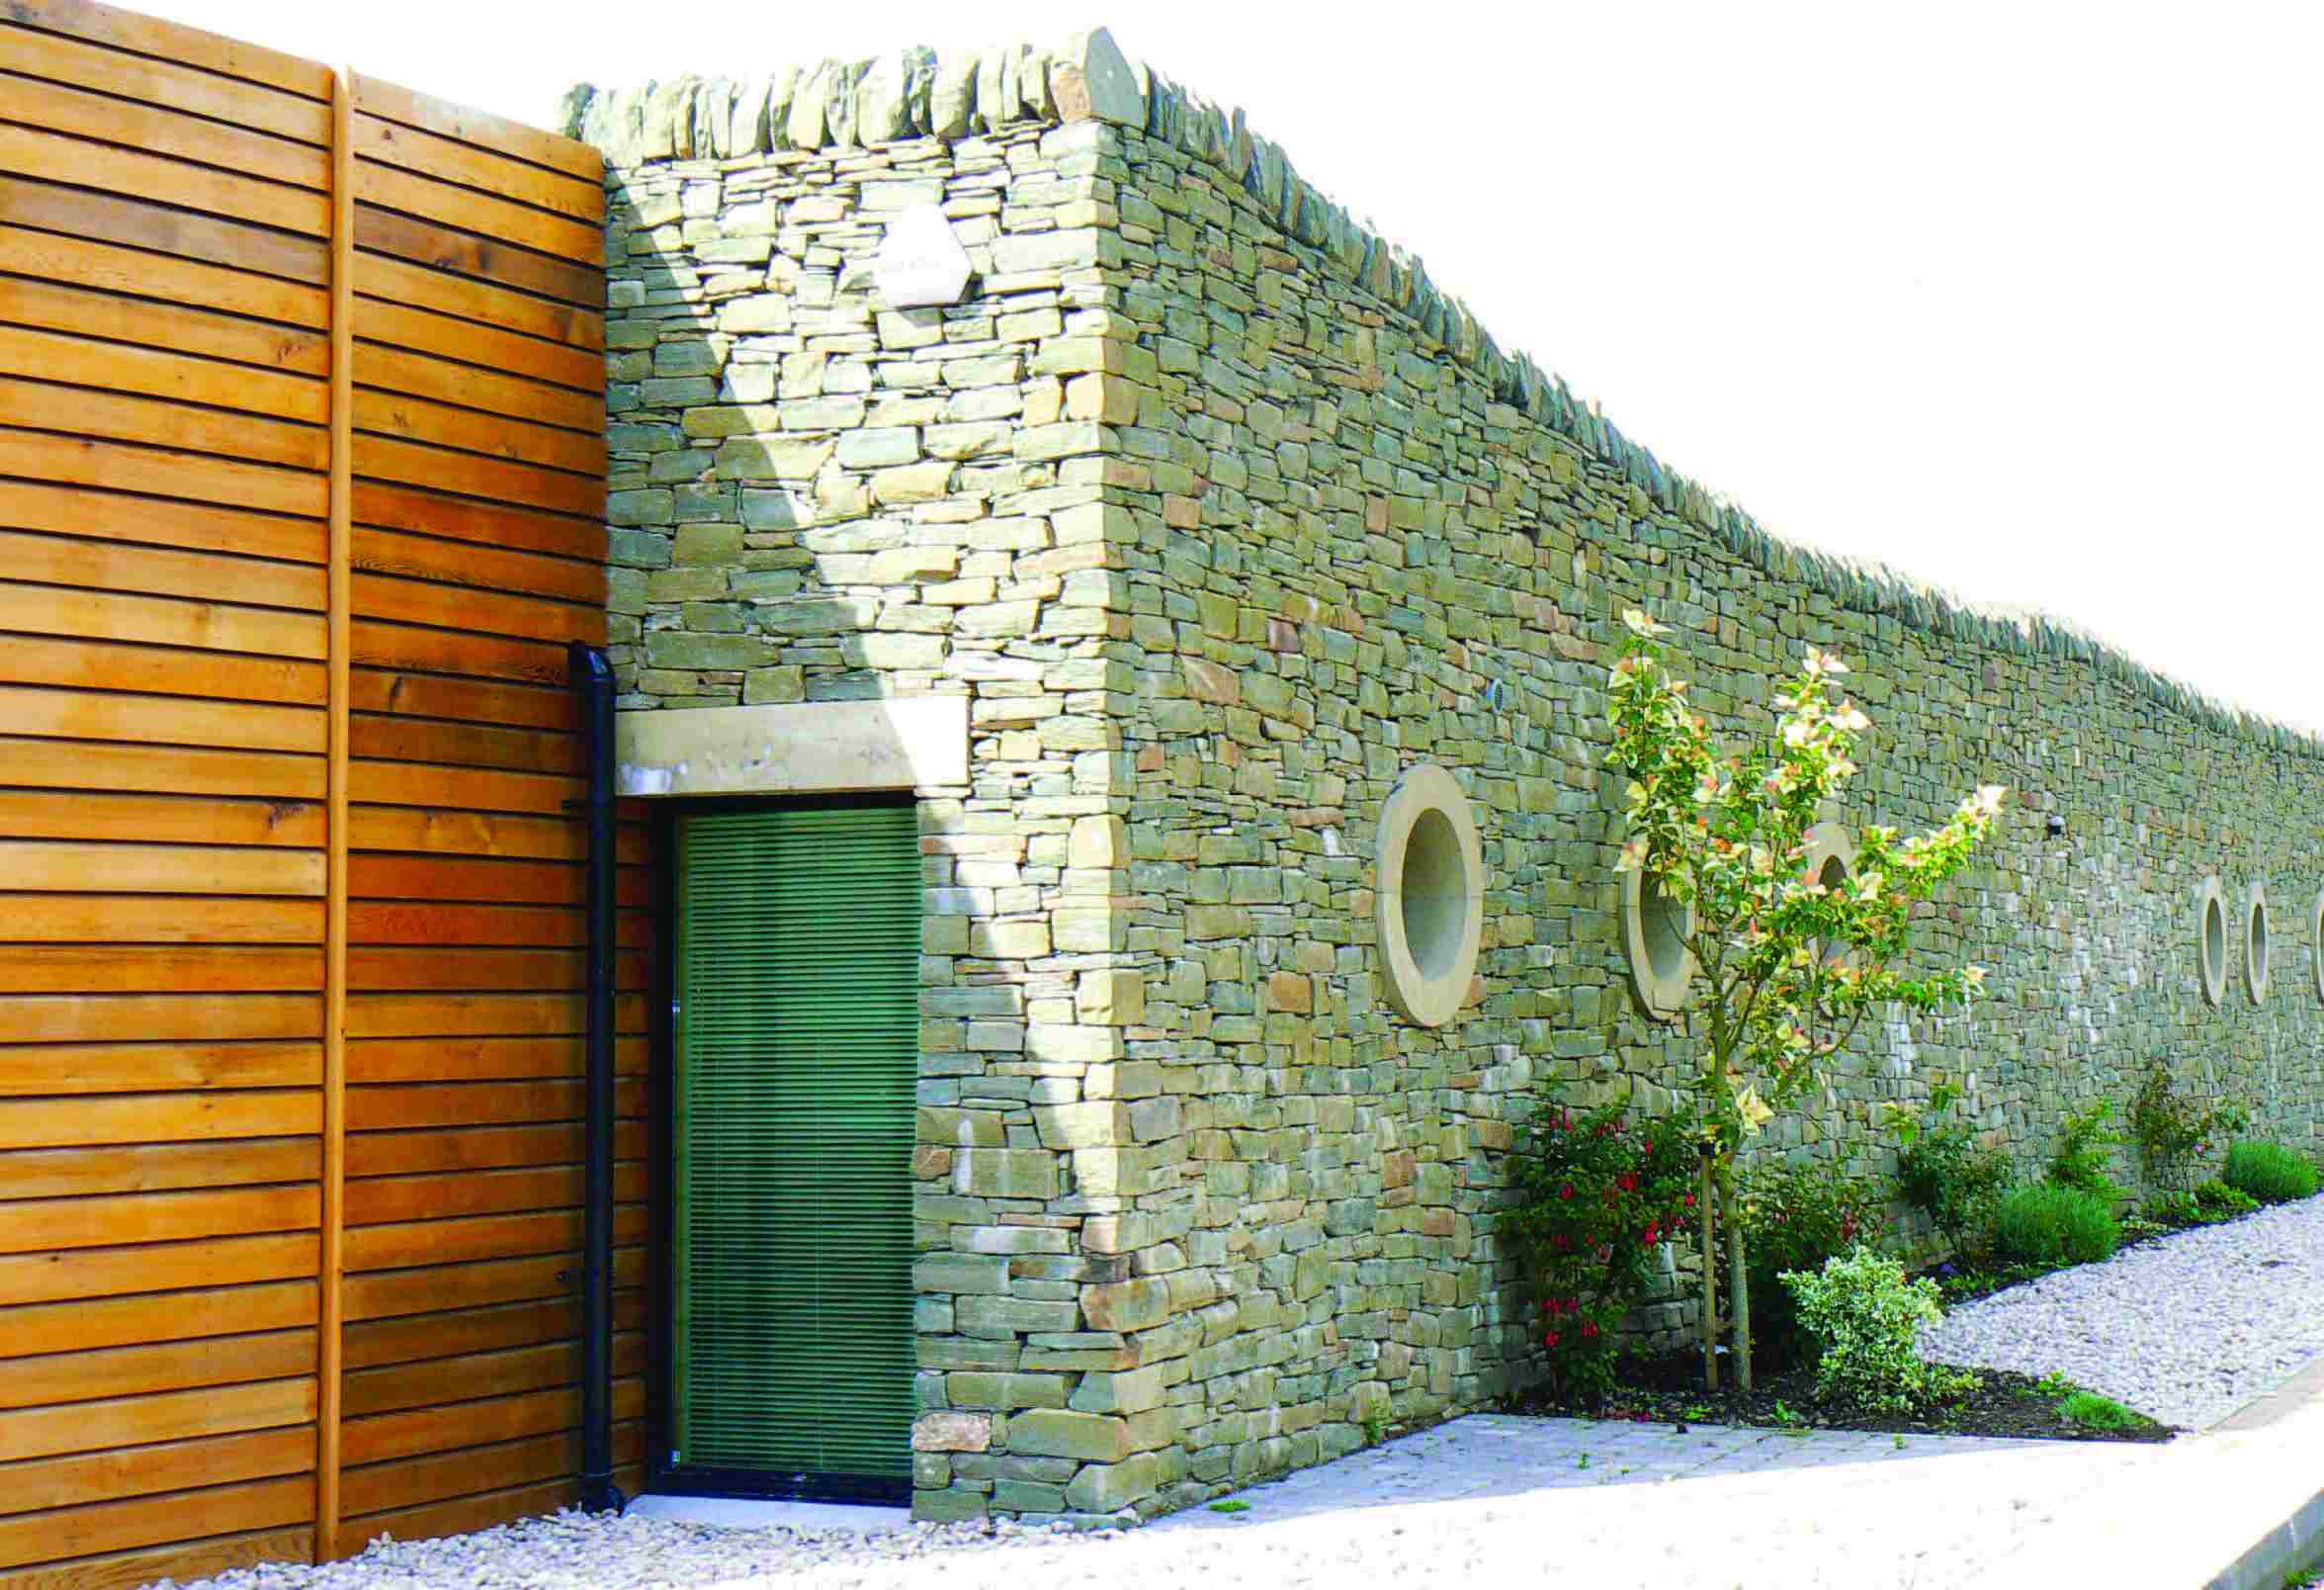 A long stone wall with a glass doors and portholes built into the wall. 